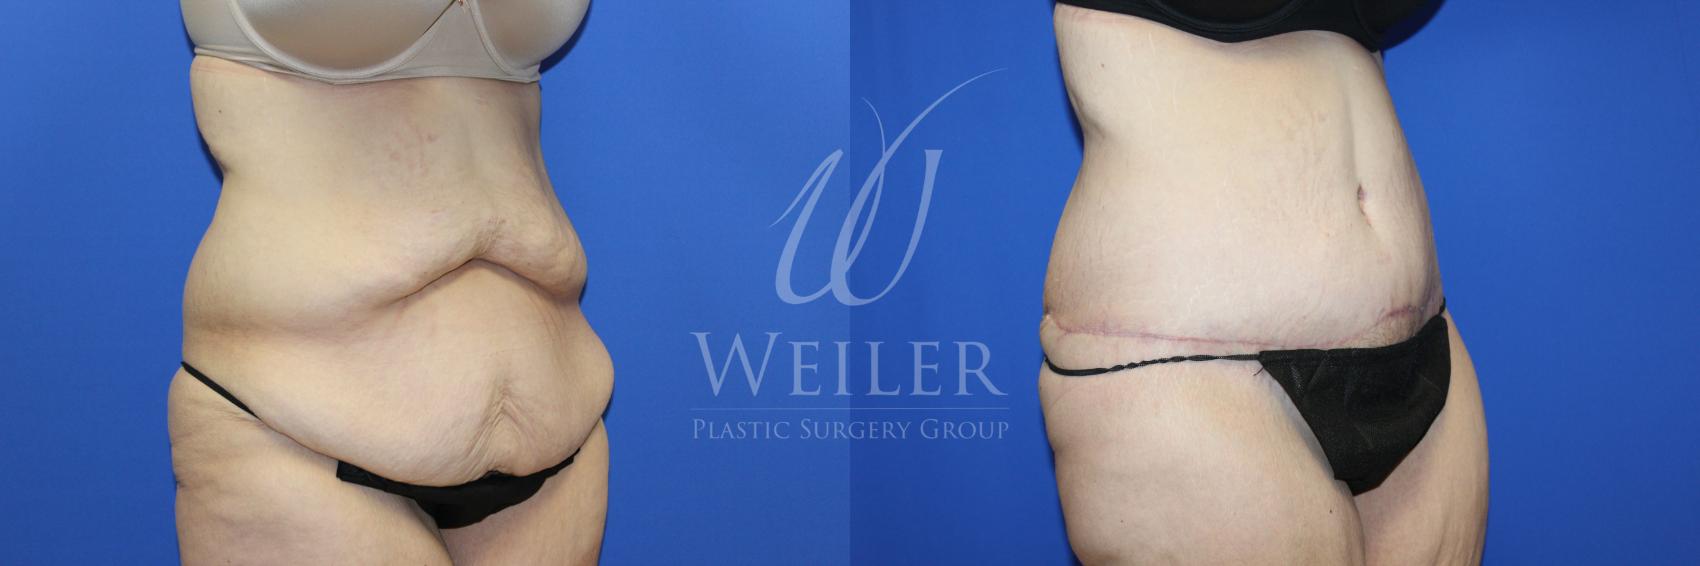 Before & After Tummy Tuck Case 1239 Left Oblique View in Baton Rouge, New Orleans, & Lafayette, Louisiana